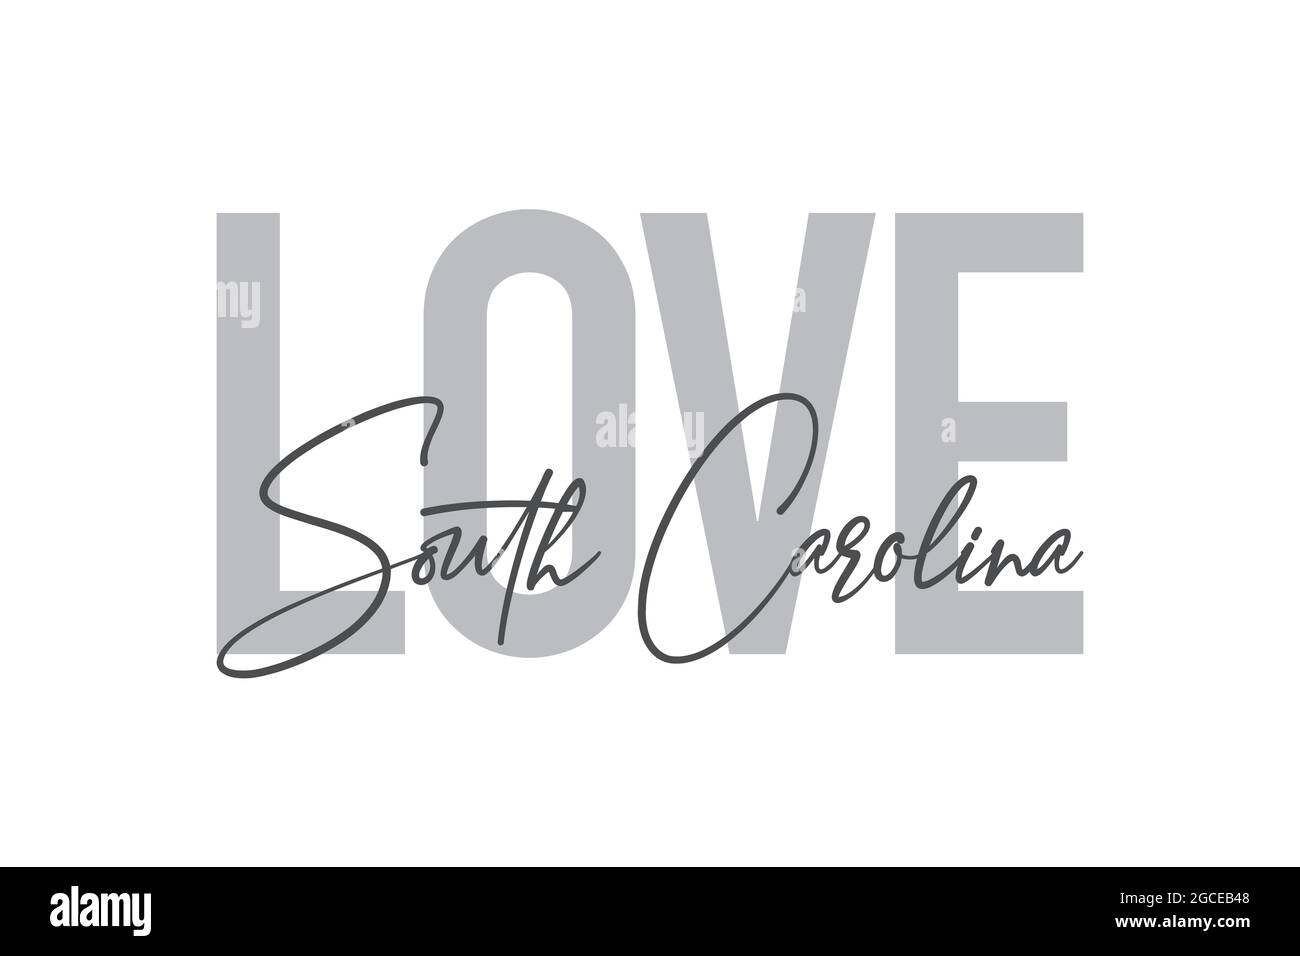 Modern, simple, minimal typographic design of a saying 'Love South Carolina' in tones of grey color. Cool, urban, trendy and playful graphic vector ar Stock Photo